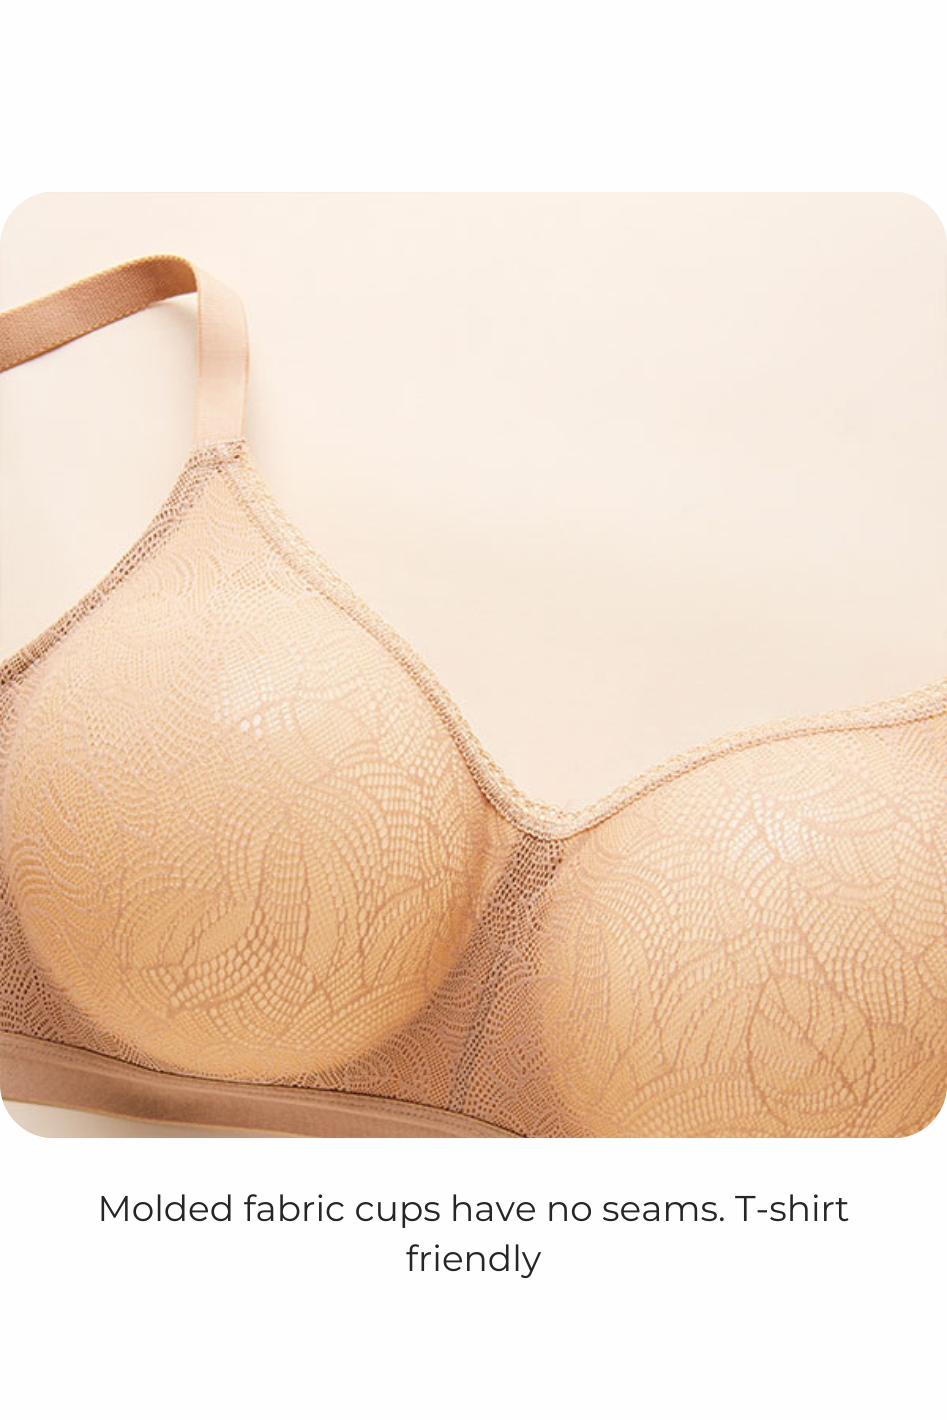 Understance Cate Wireless Soft Cup Bra Product Only #color_mocha